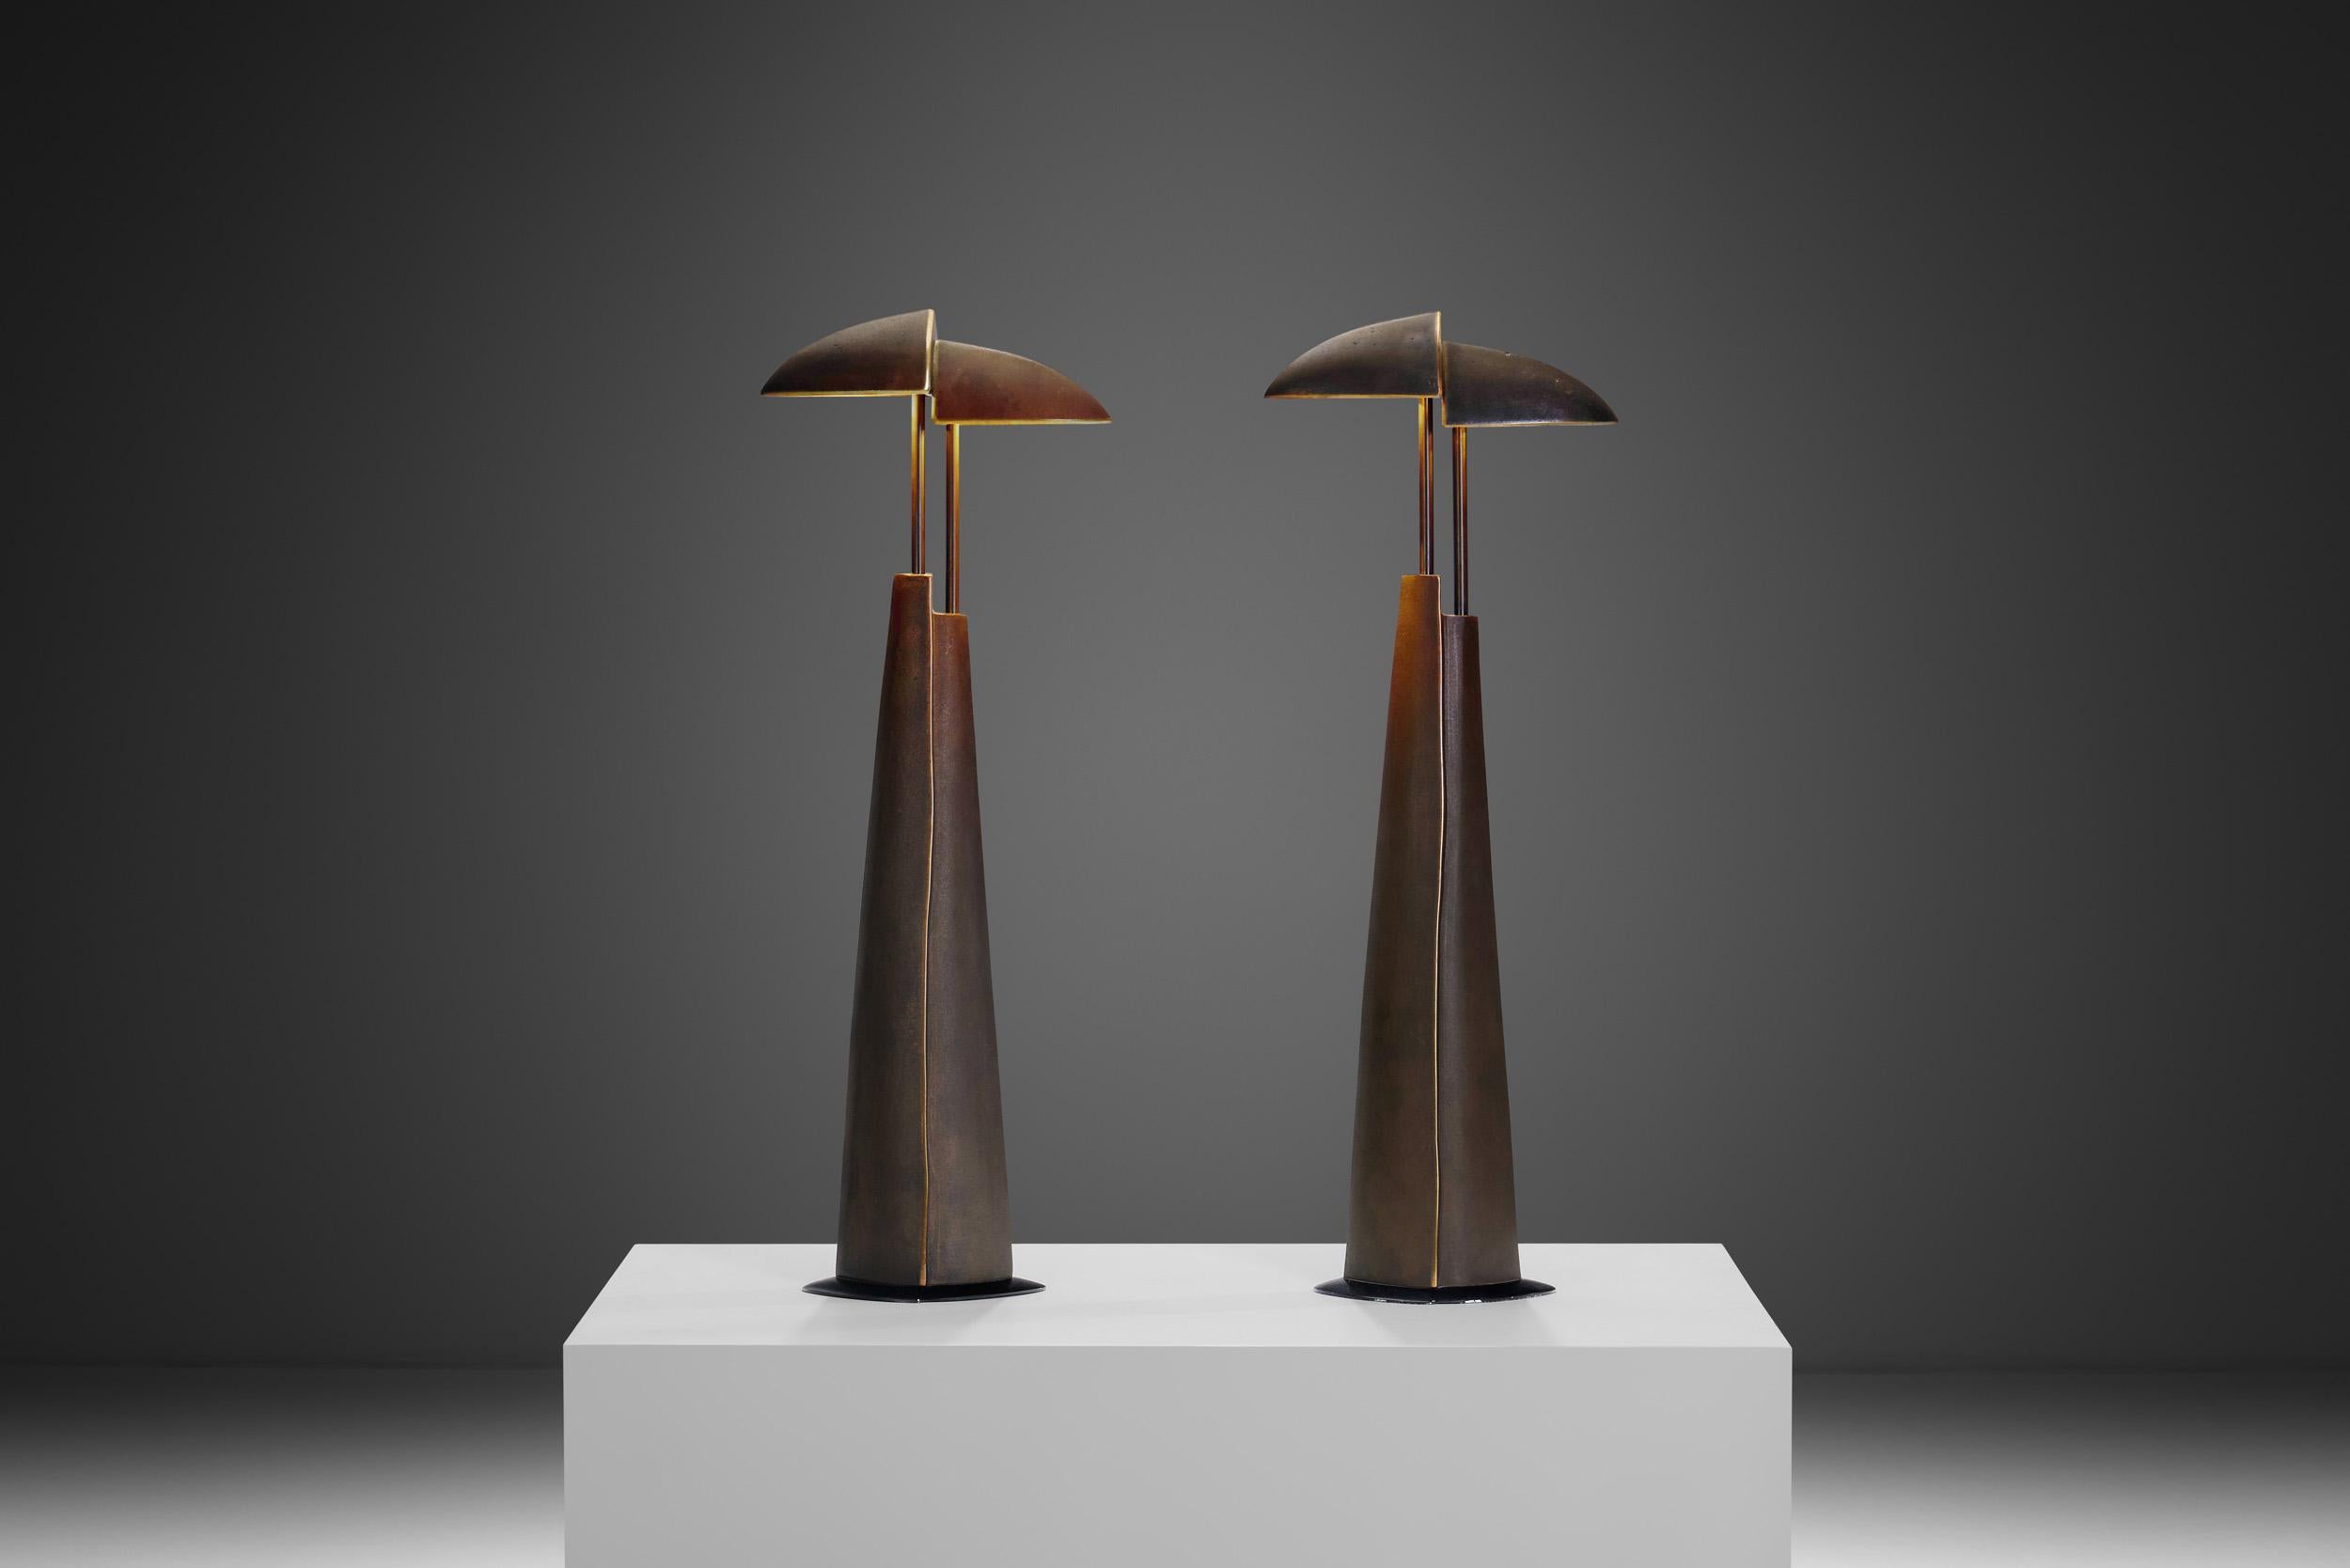 This pair of Annette van Gessel and Von Ullrich Mies designed heavy cast table lamps is a striking piece of late 20th century design.  Utilitarian by design, the medium is forged with a simplicity of efficiency in mind, with just a glance towards